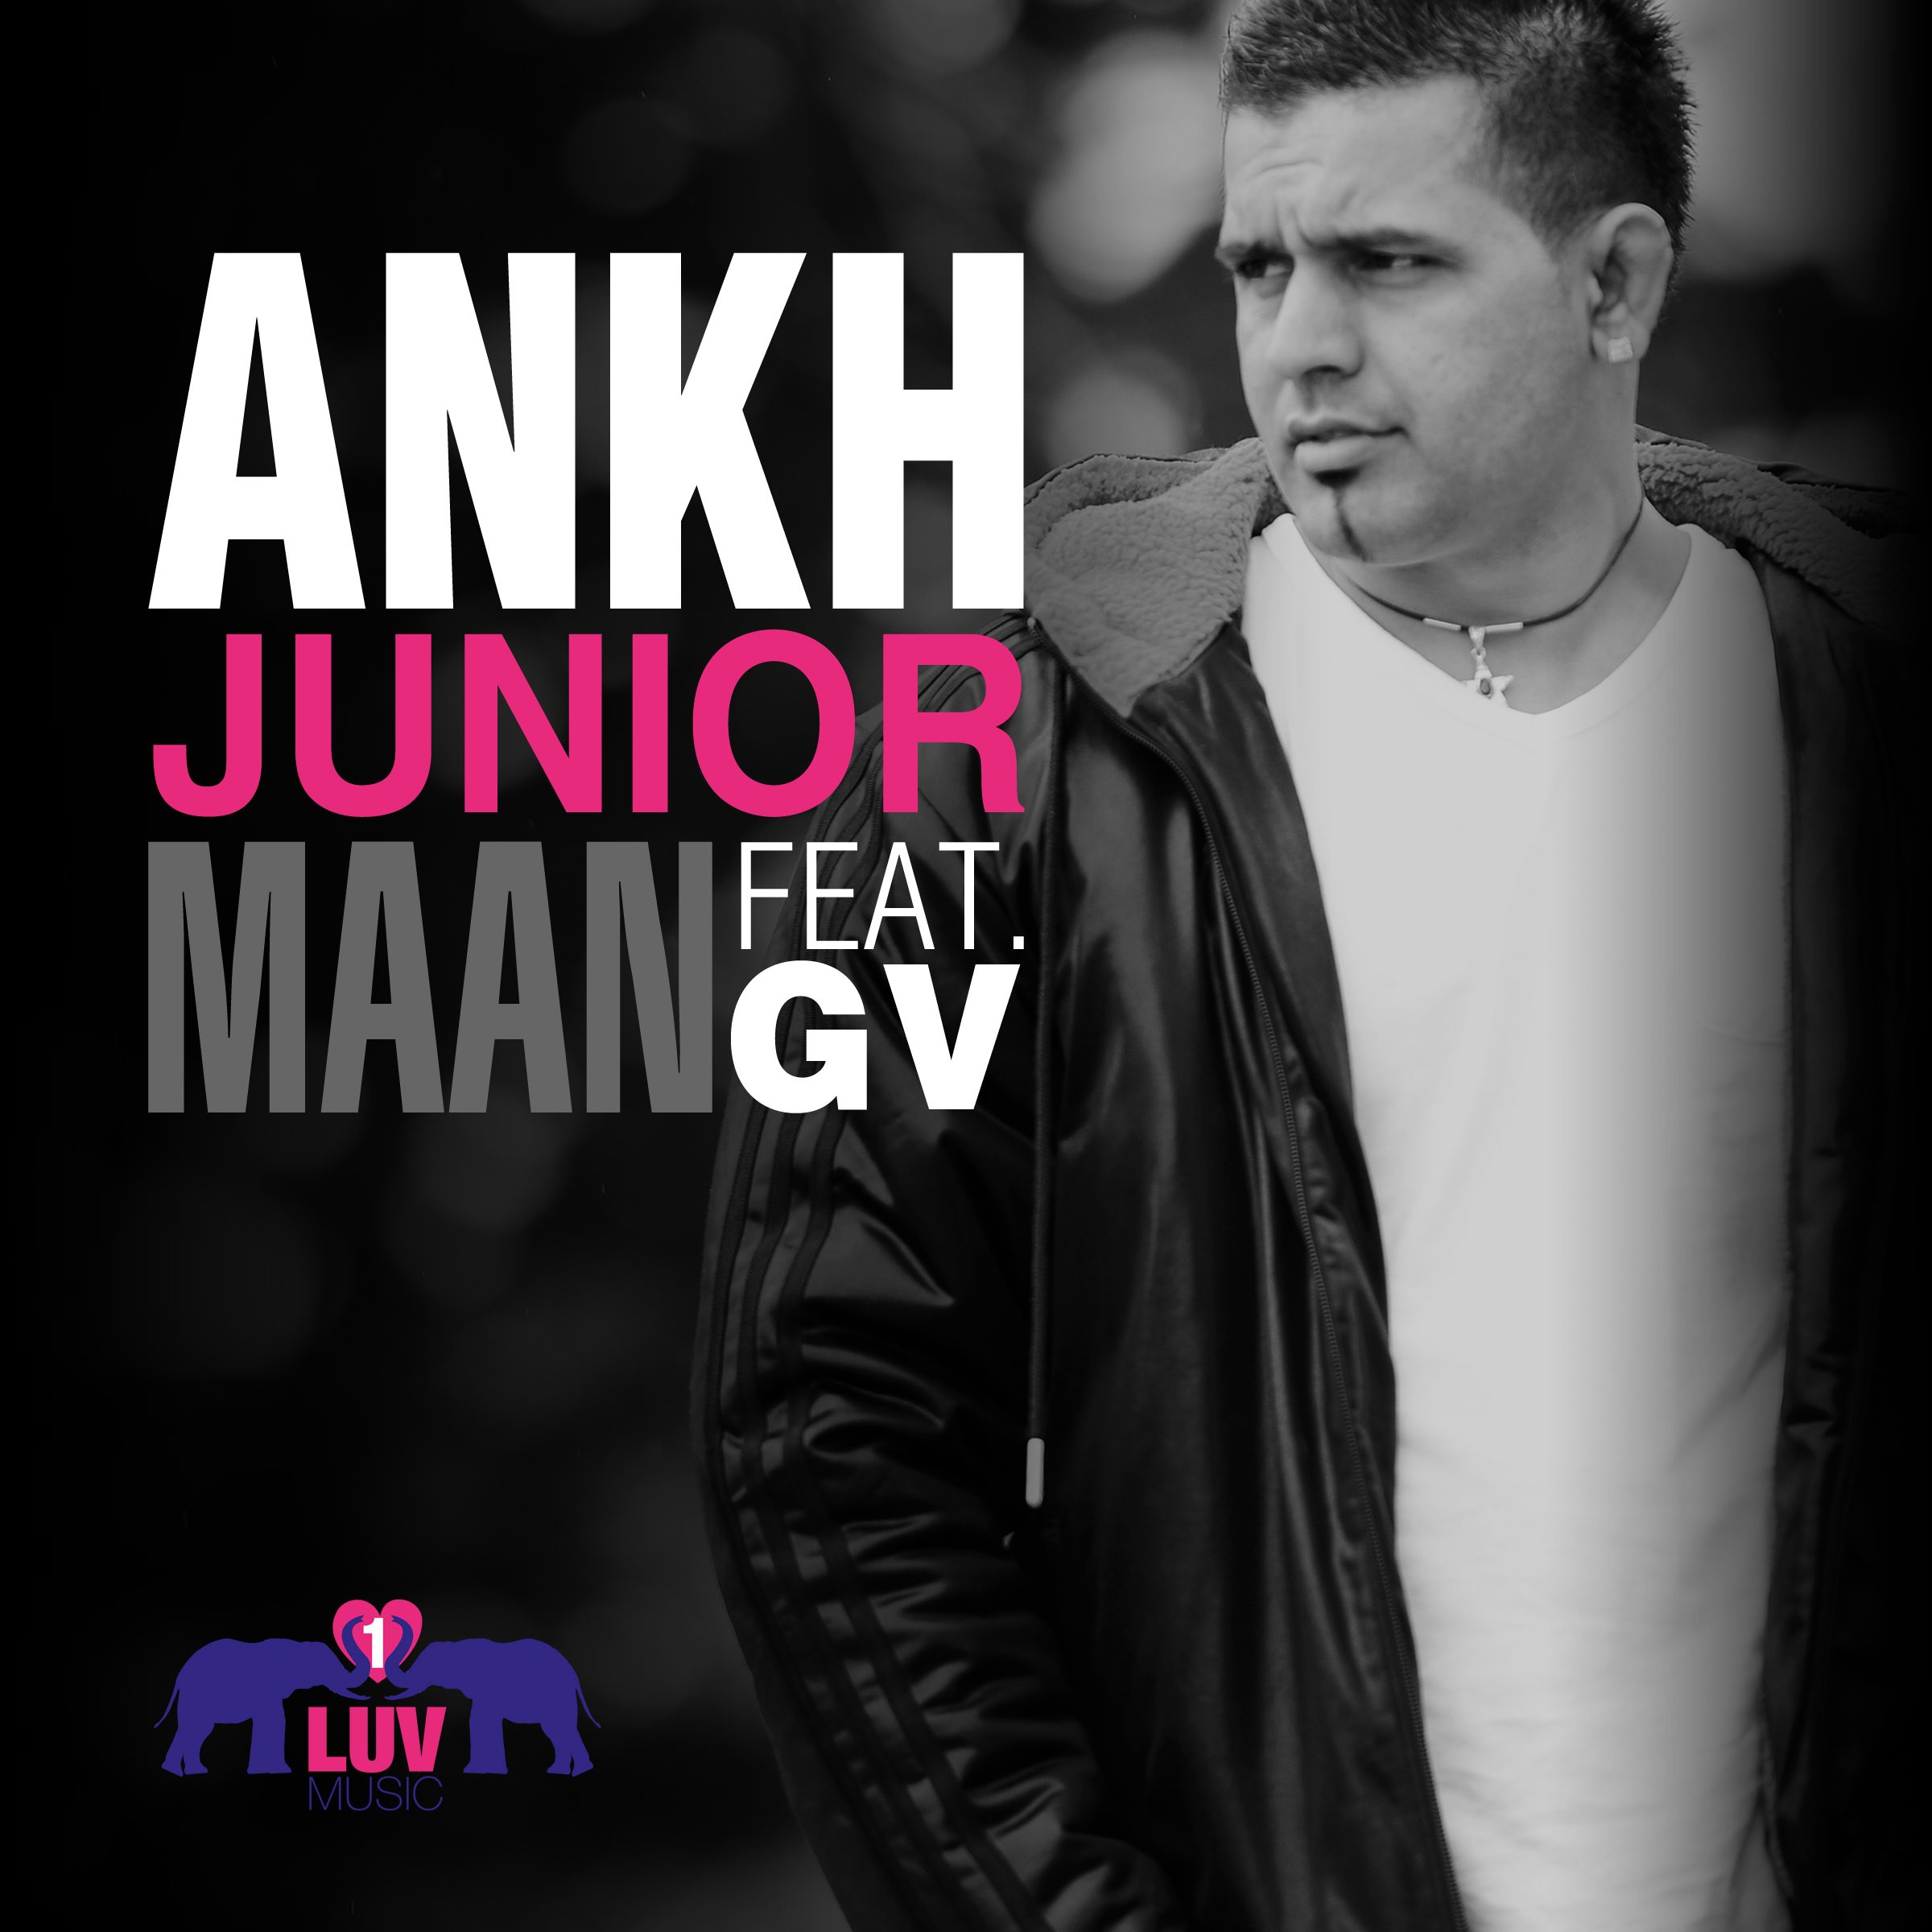 Photo of Junior Maan -“Ankh” feat GV Out Now